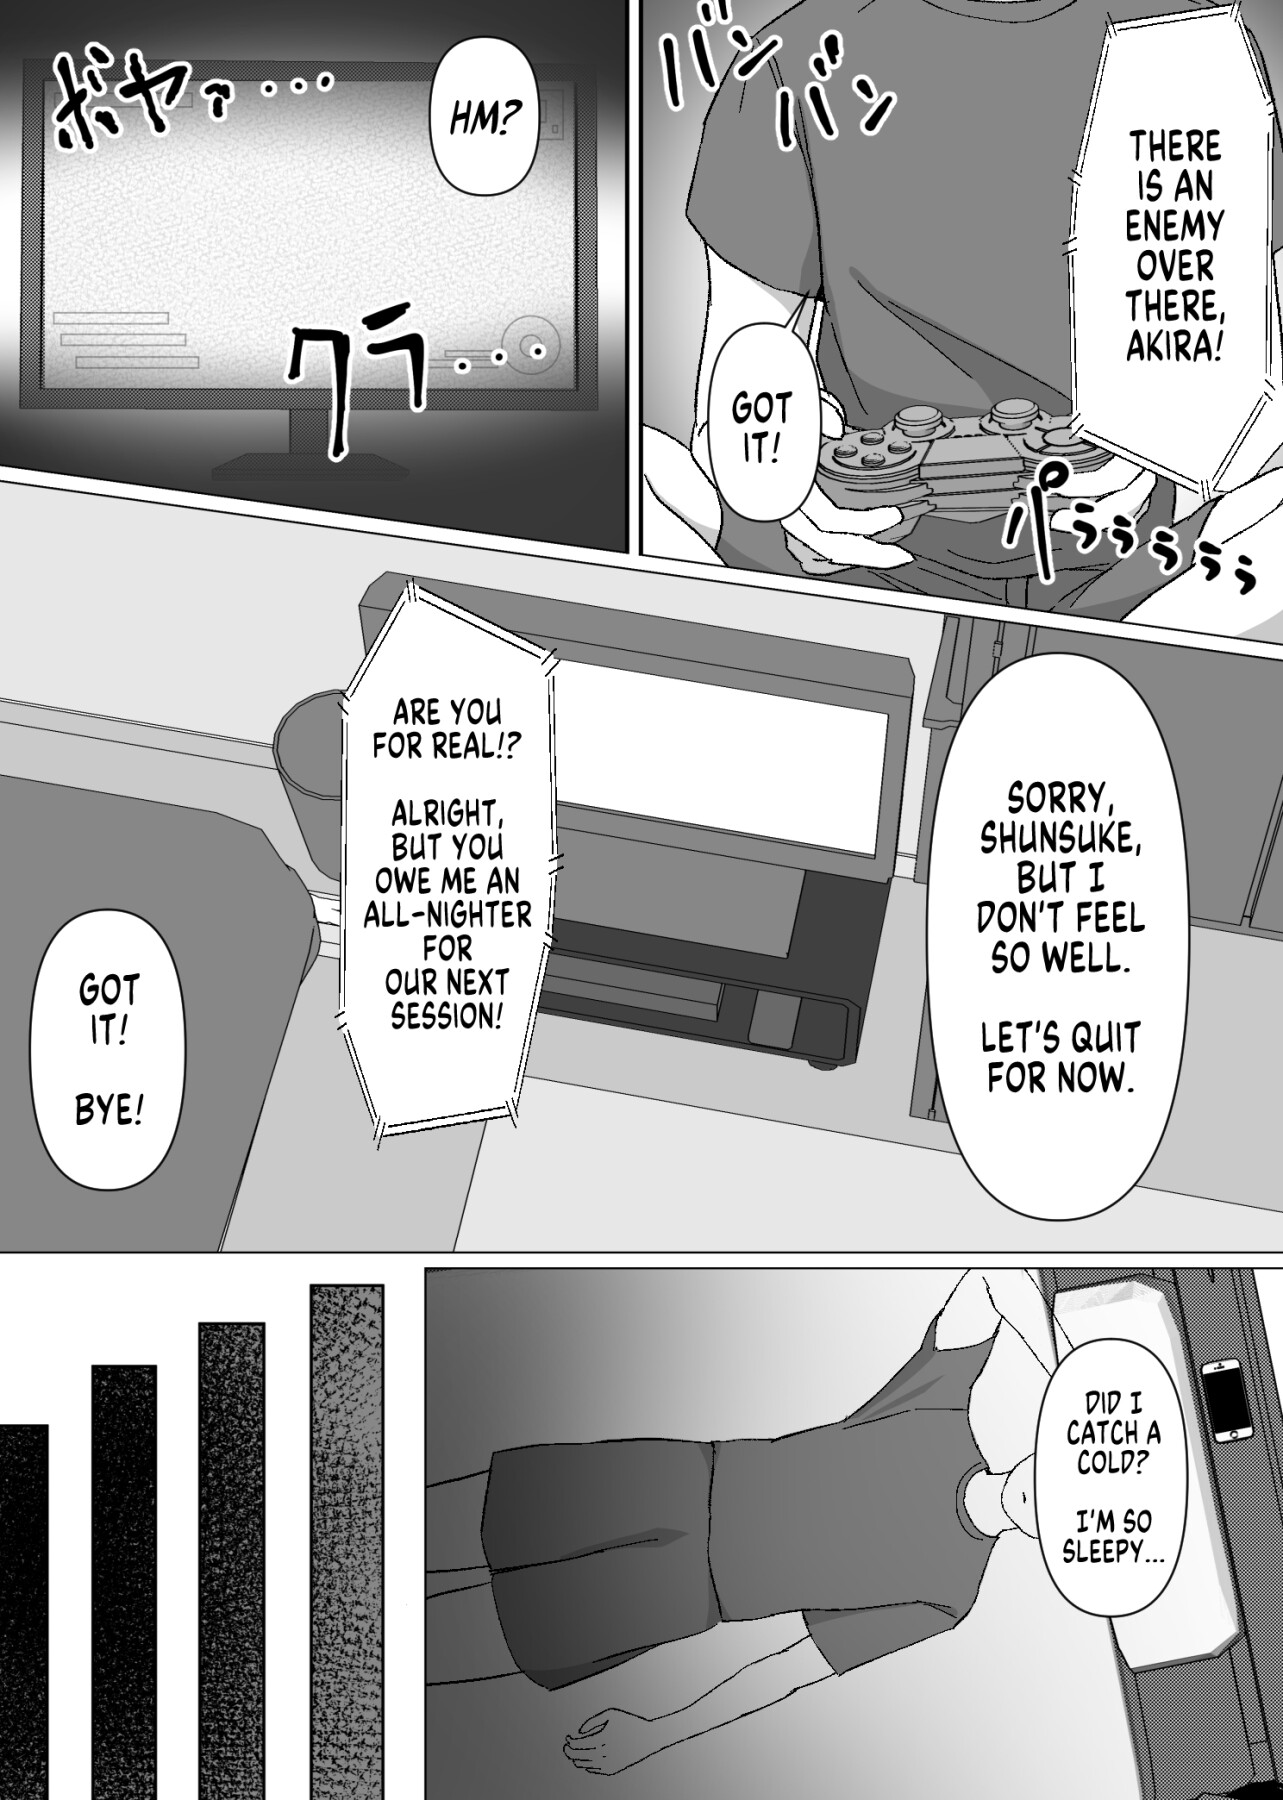 Hentai Manga Comic-A Story About Getting Genderswapped And Having Raw Sex With Your Childhood Friend-Read-2